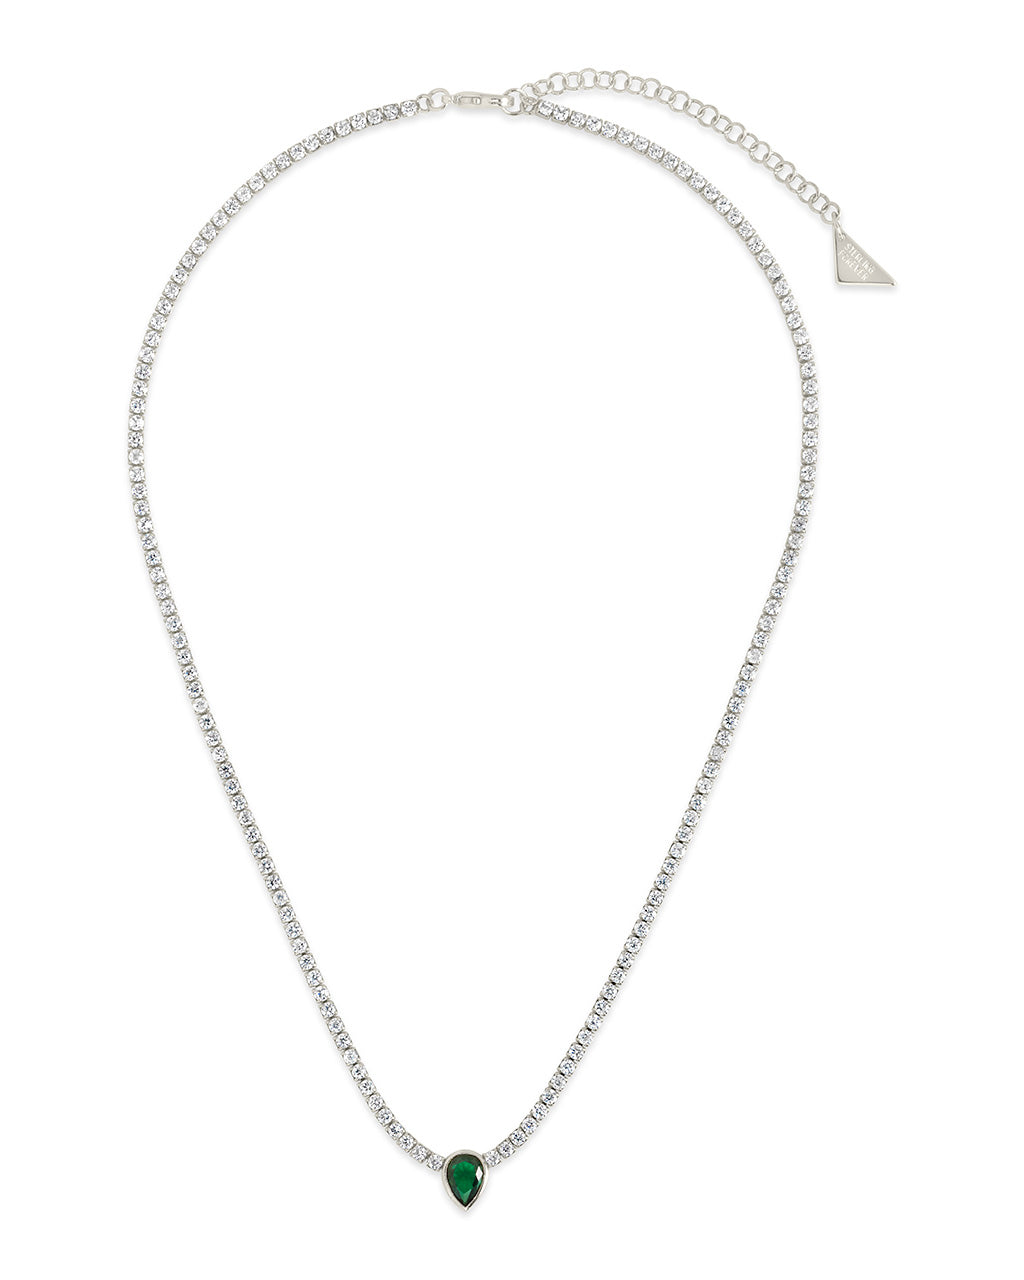 Alice Tennis Necklace Necklace Sterling Forever Silver 